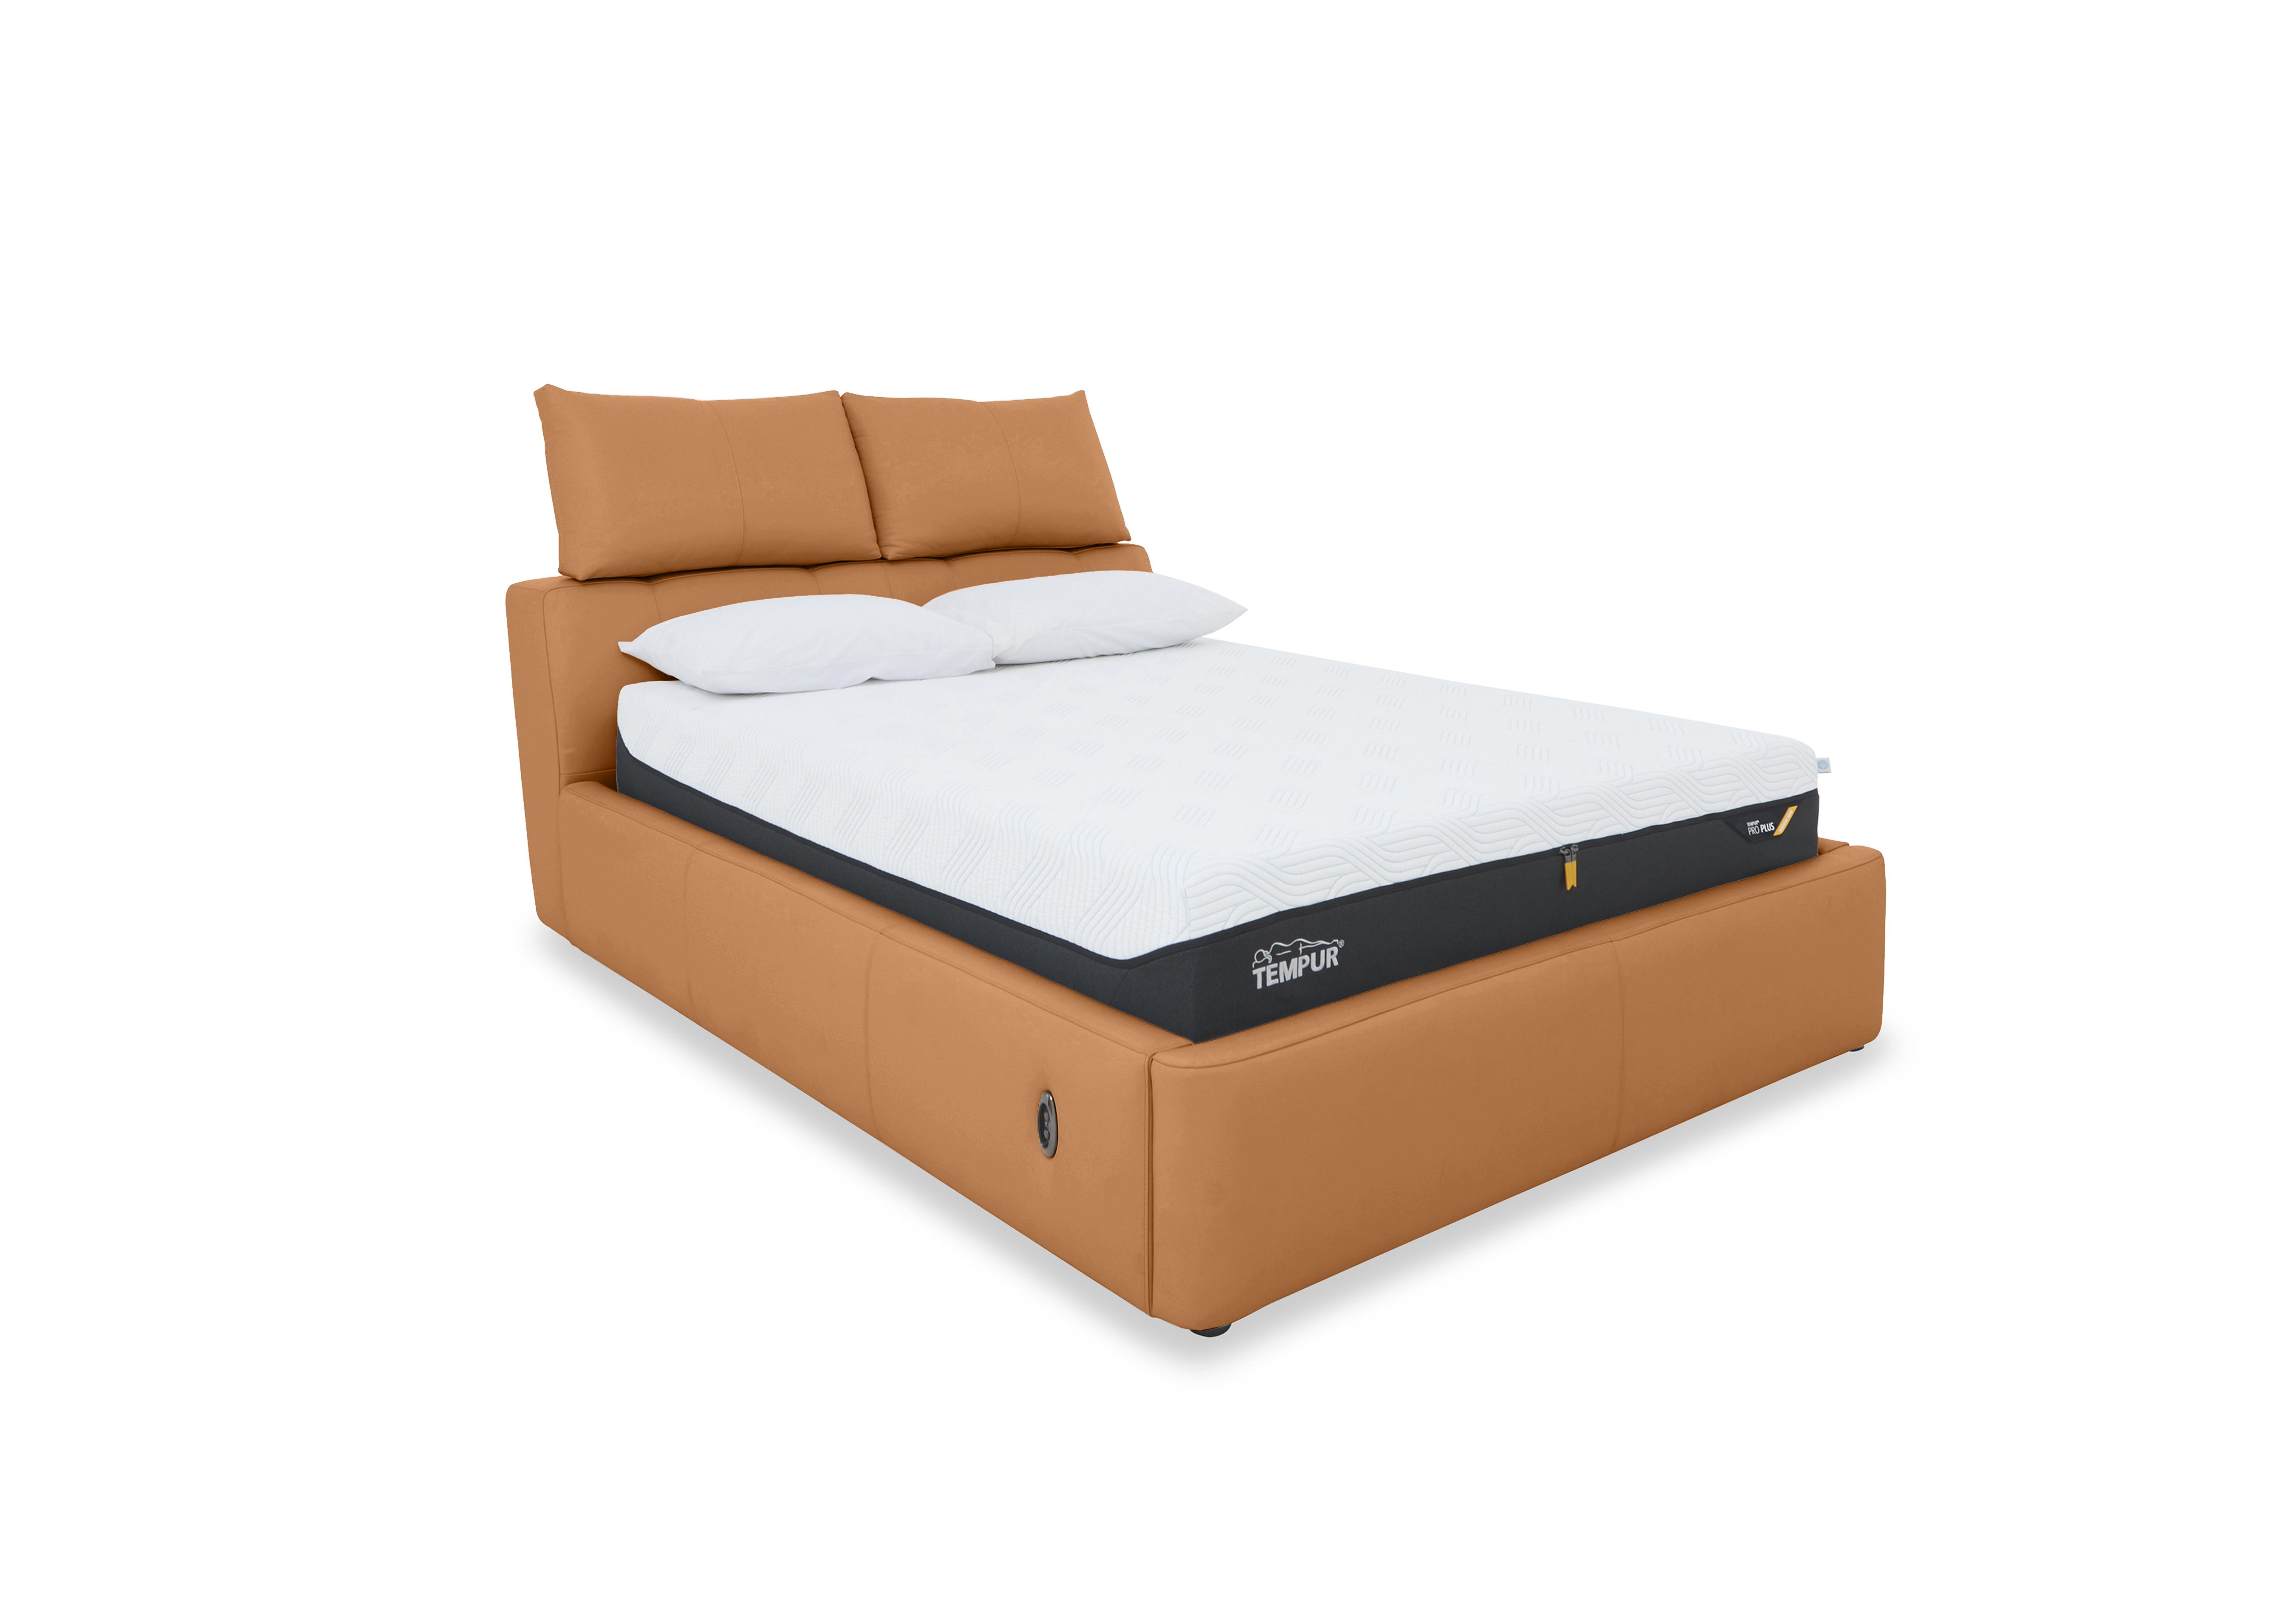 Tyrell Leather Electric Ottoman Bed Frame in Bv-335e Honey Yellow on Furniture Village